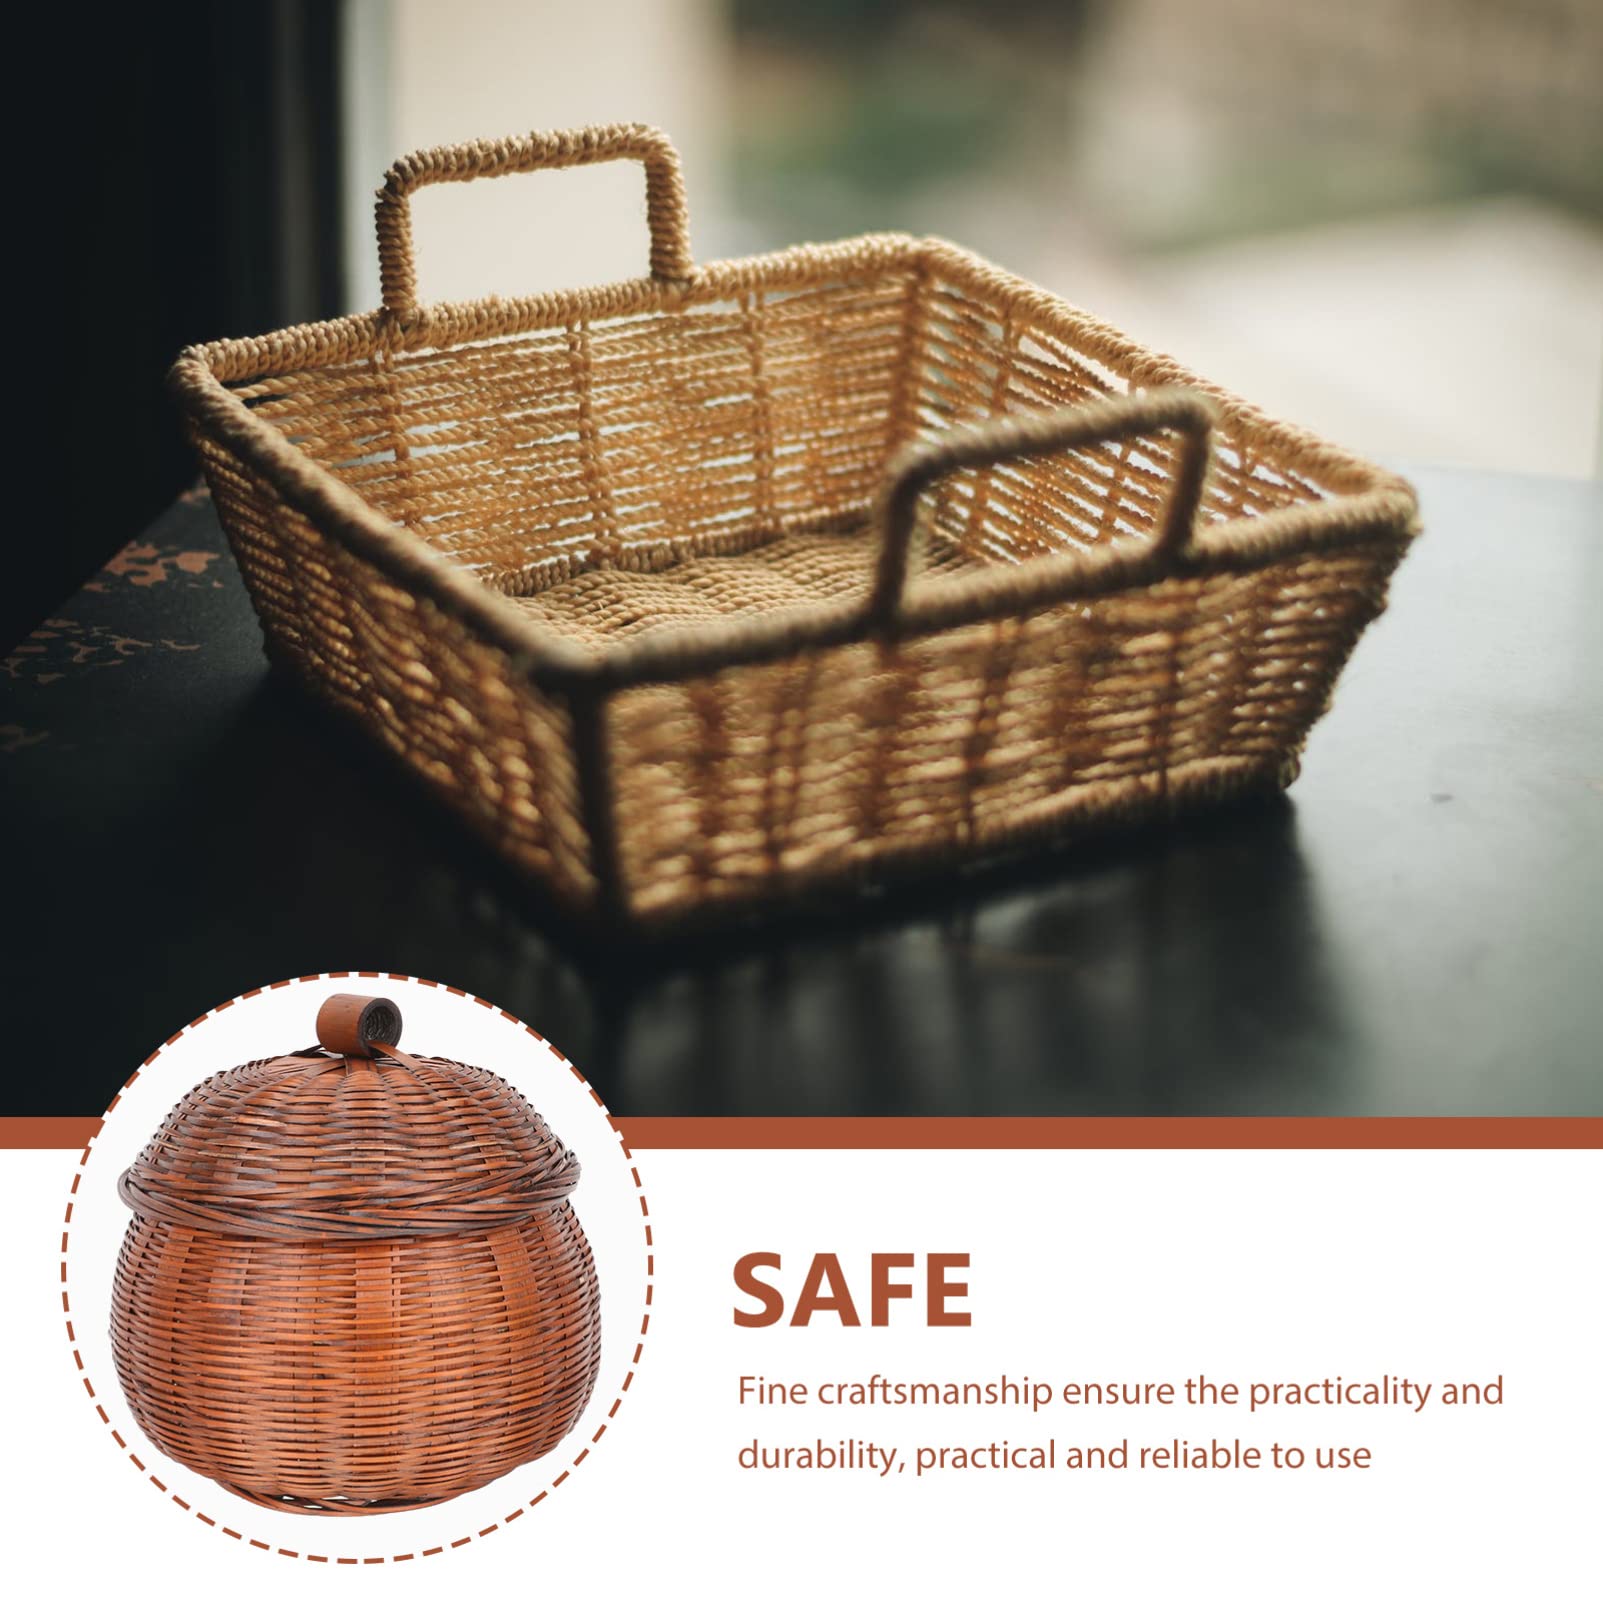 Cabilock Wicker Woven Basket Mini Rattan Storage Basket Pumpkin Shaped Round Rattan Boxes with Lid Hand- Woven Organizer Bin Pot Container for Snacks Gobang Chess Egg Fruit